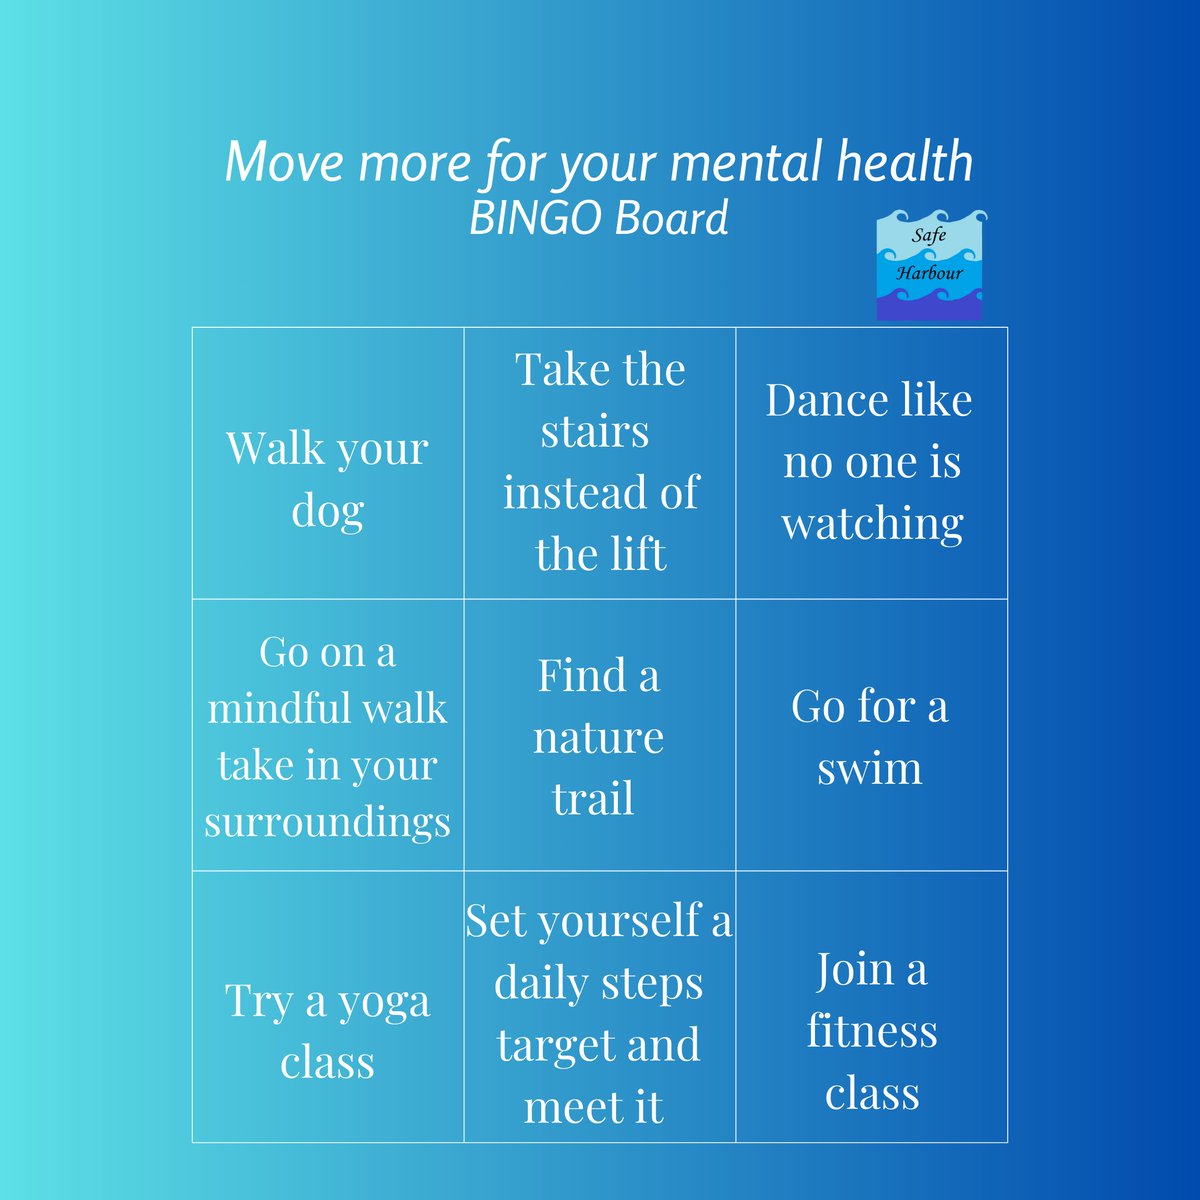 Today marks the beginning of mental health week and we thought that we'd start the week off with a game of BINGO! This year the focus is on moving more for your mental health. How many of the boxes can you get this week?